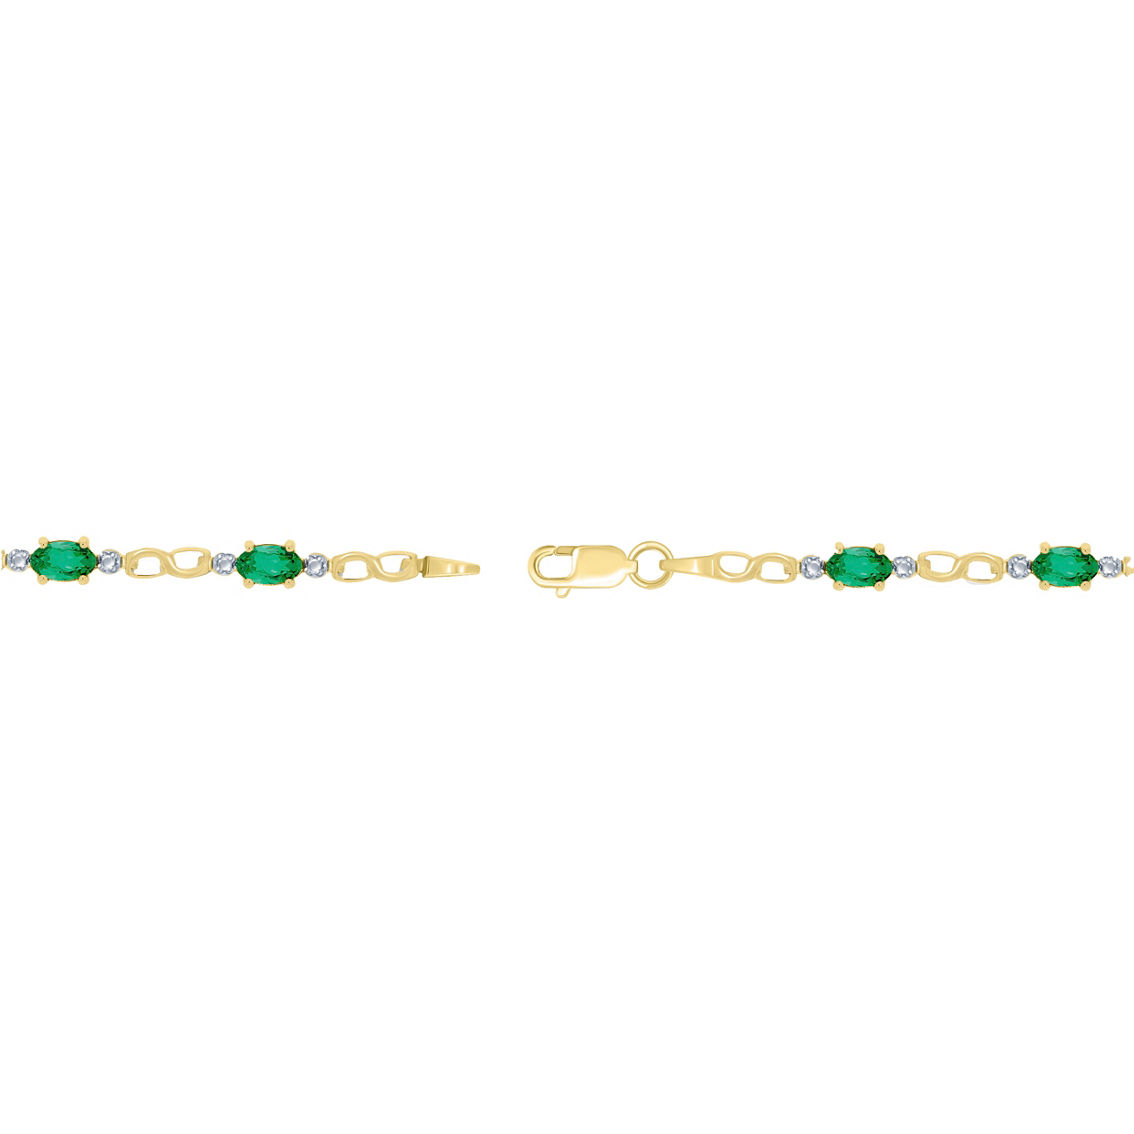 10K Yellow Gold Created Emerald and Diamond Accent Infinity Link Bracelet - Image 3 of 3